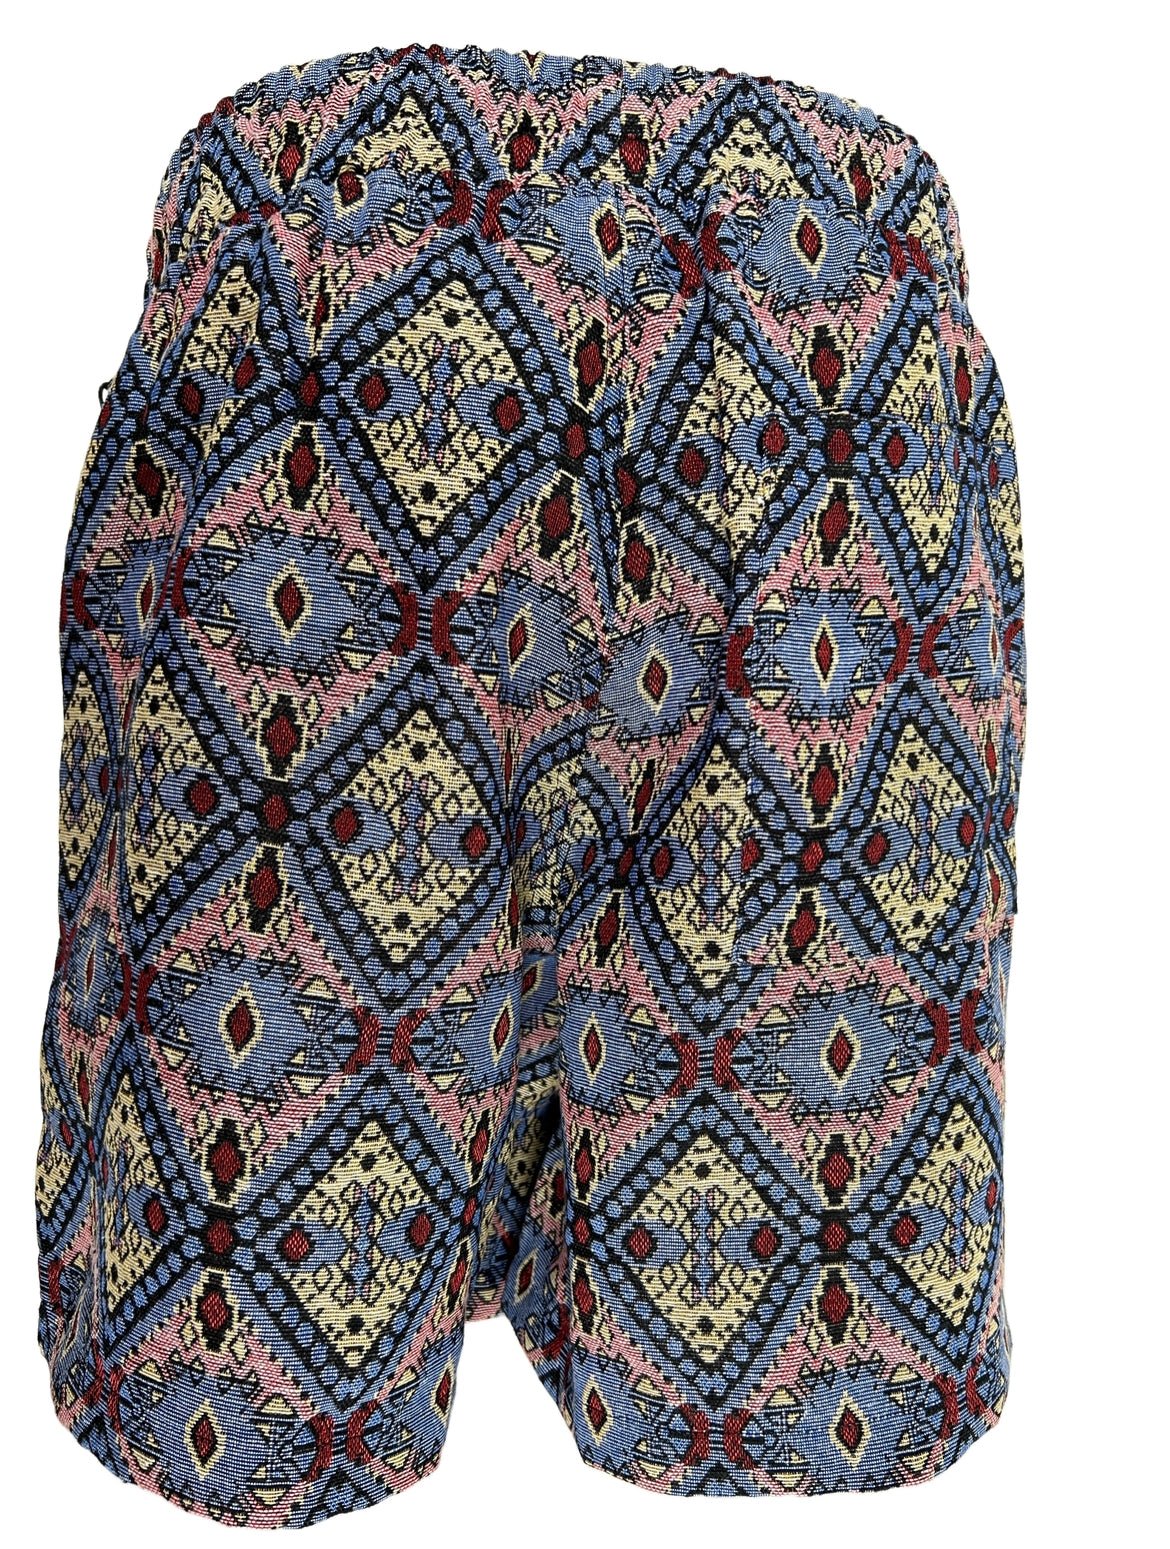 A PLEASURES women's shorts with a graphic print pattern.